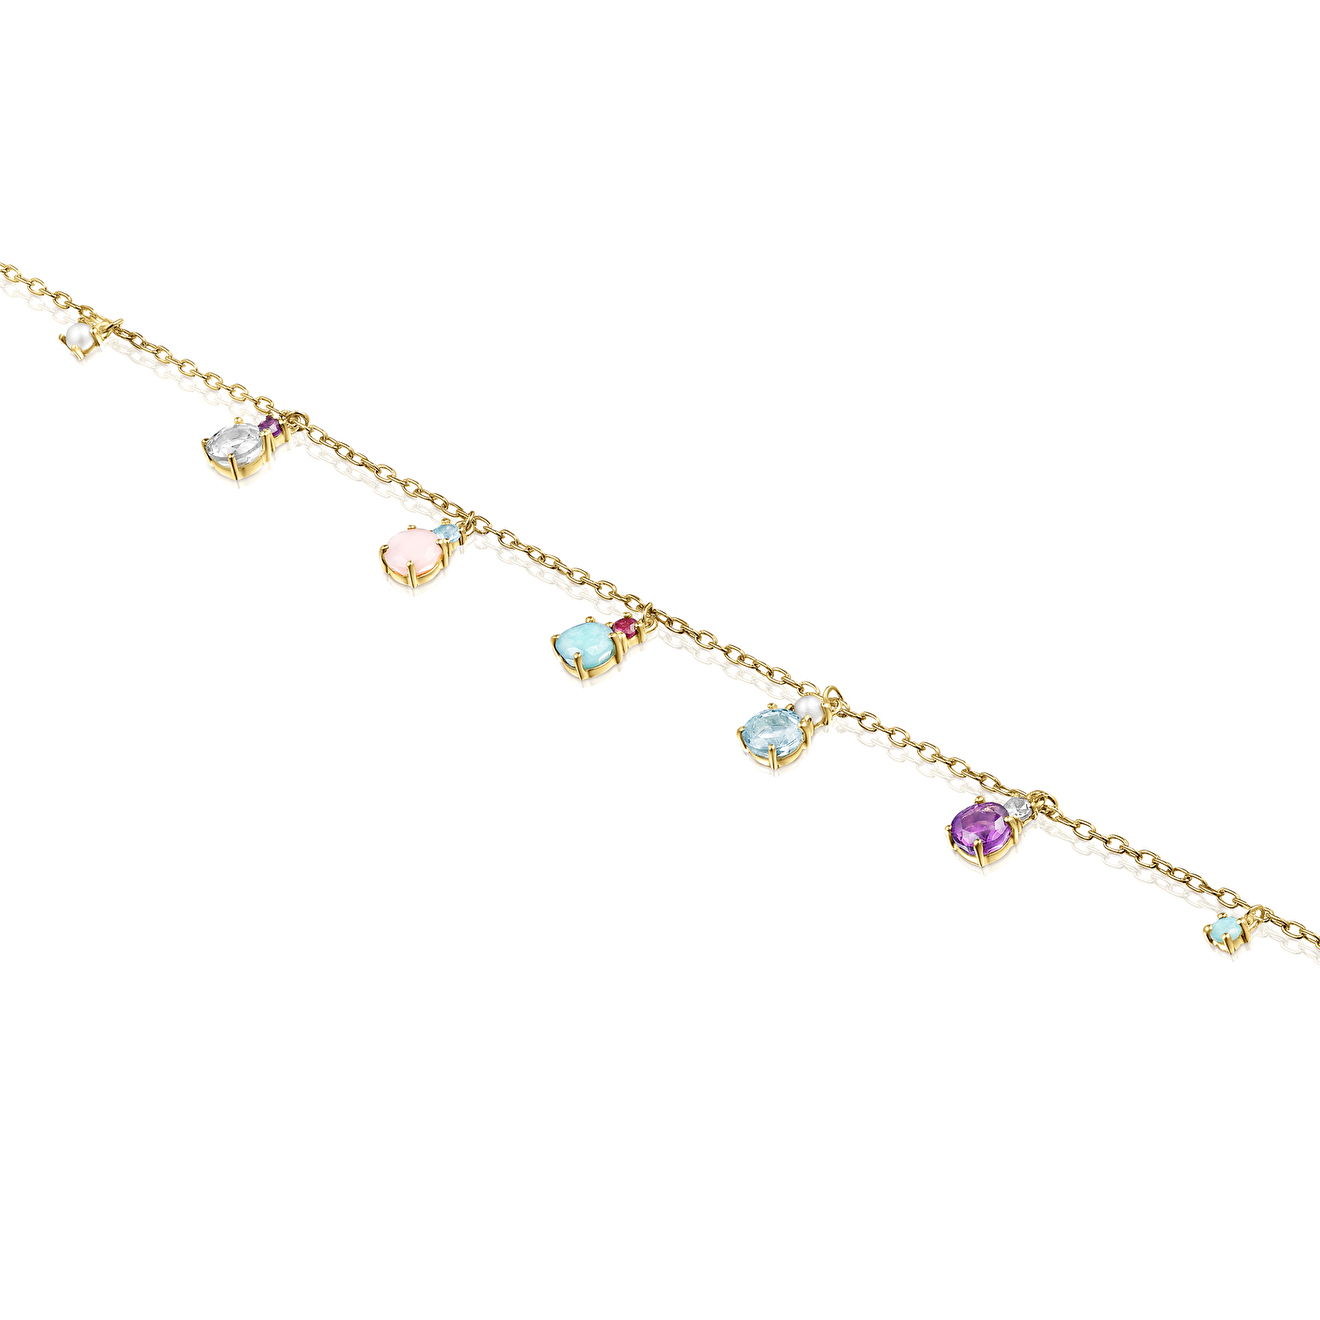 Mini Ivette bracelet in yellow gold with semi-precious stones – buy at  Poison Drop online store, SKU